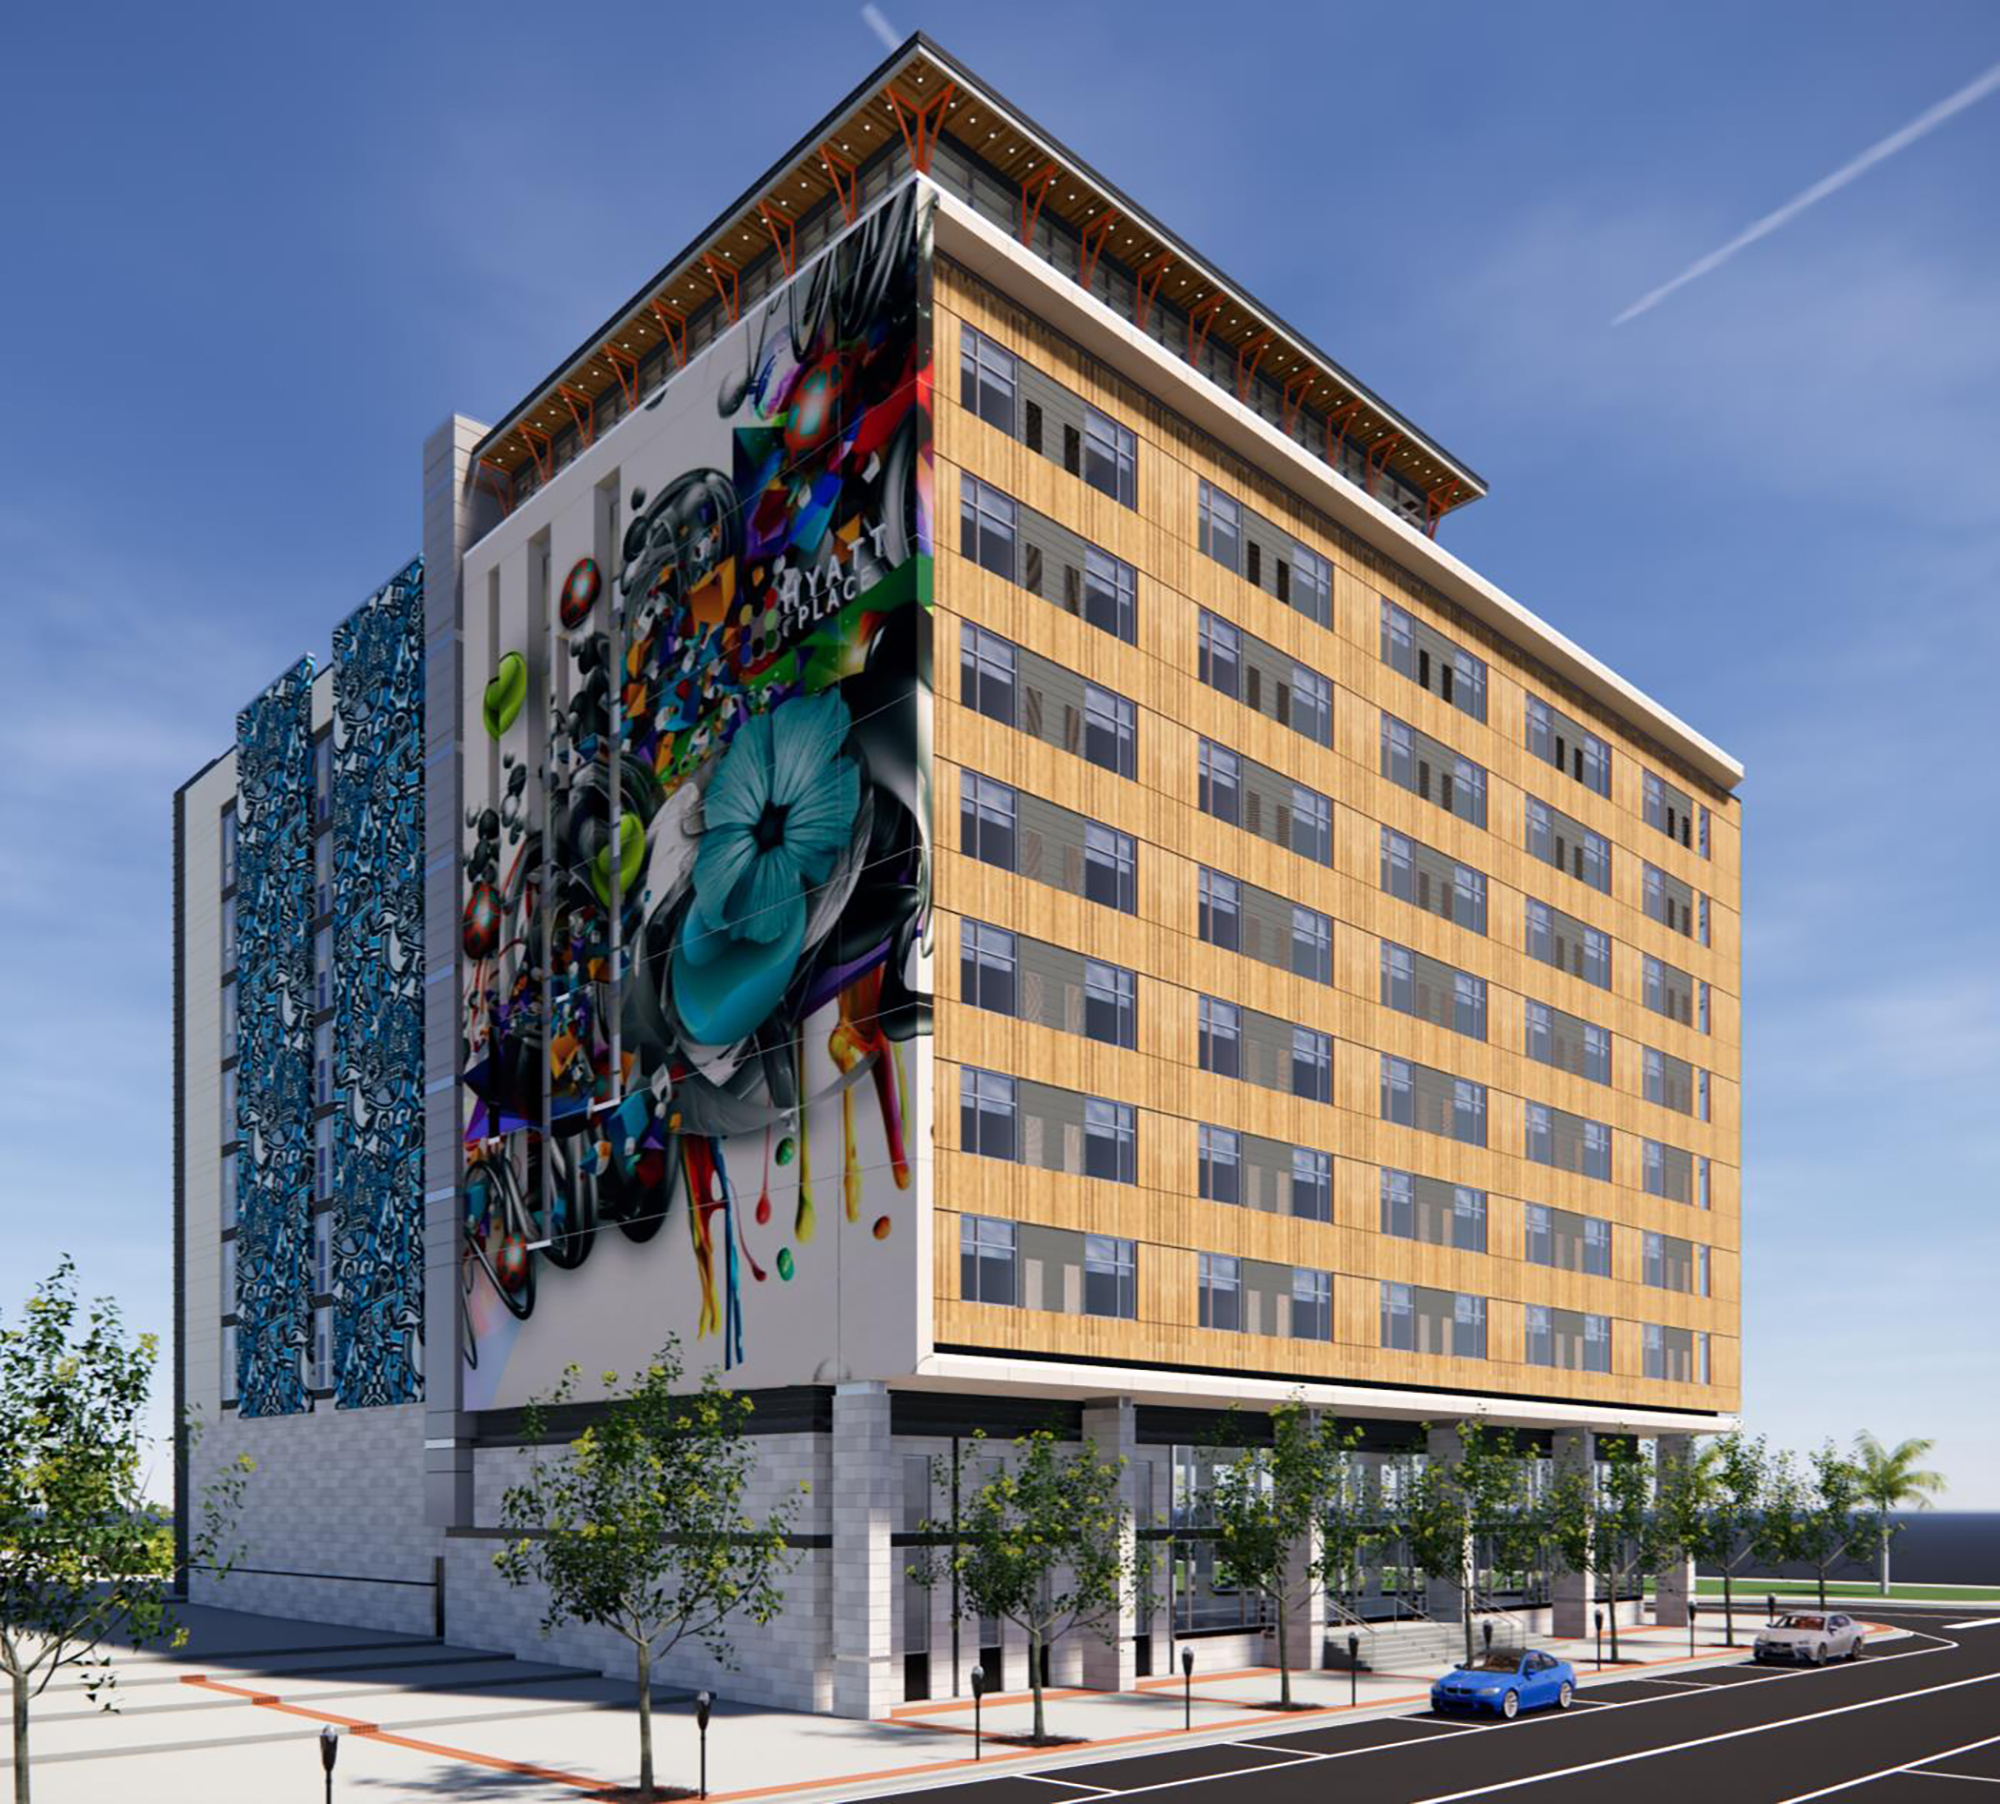 Hyatt Place on Hogan Street is one of seven hotels in the works Downtown.